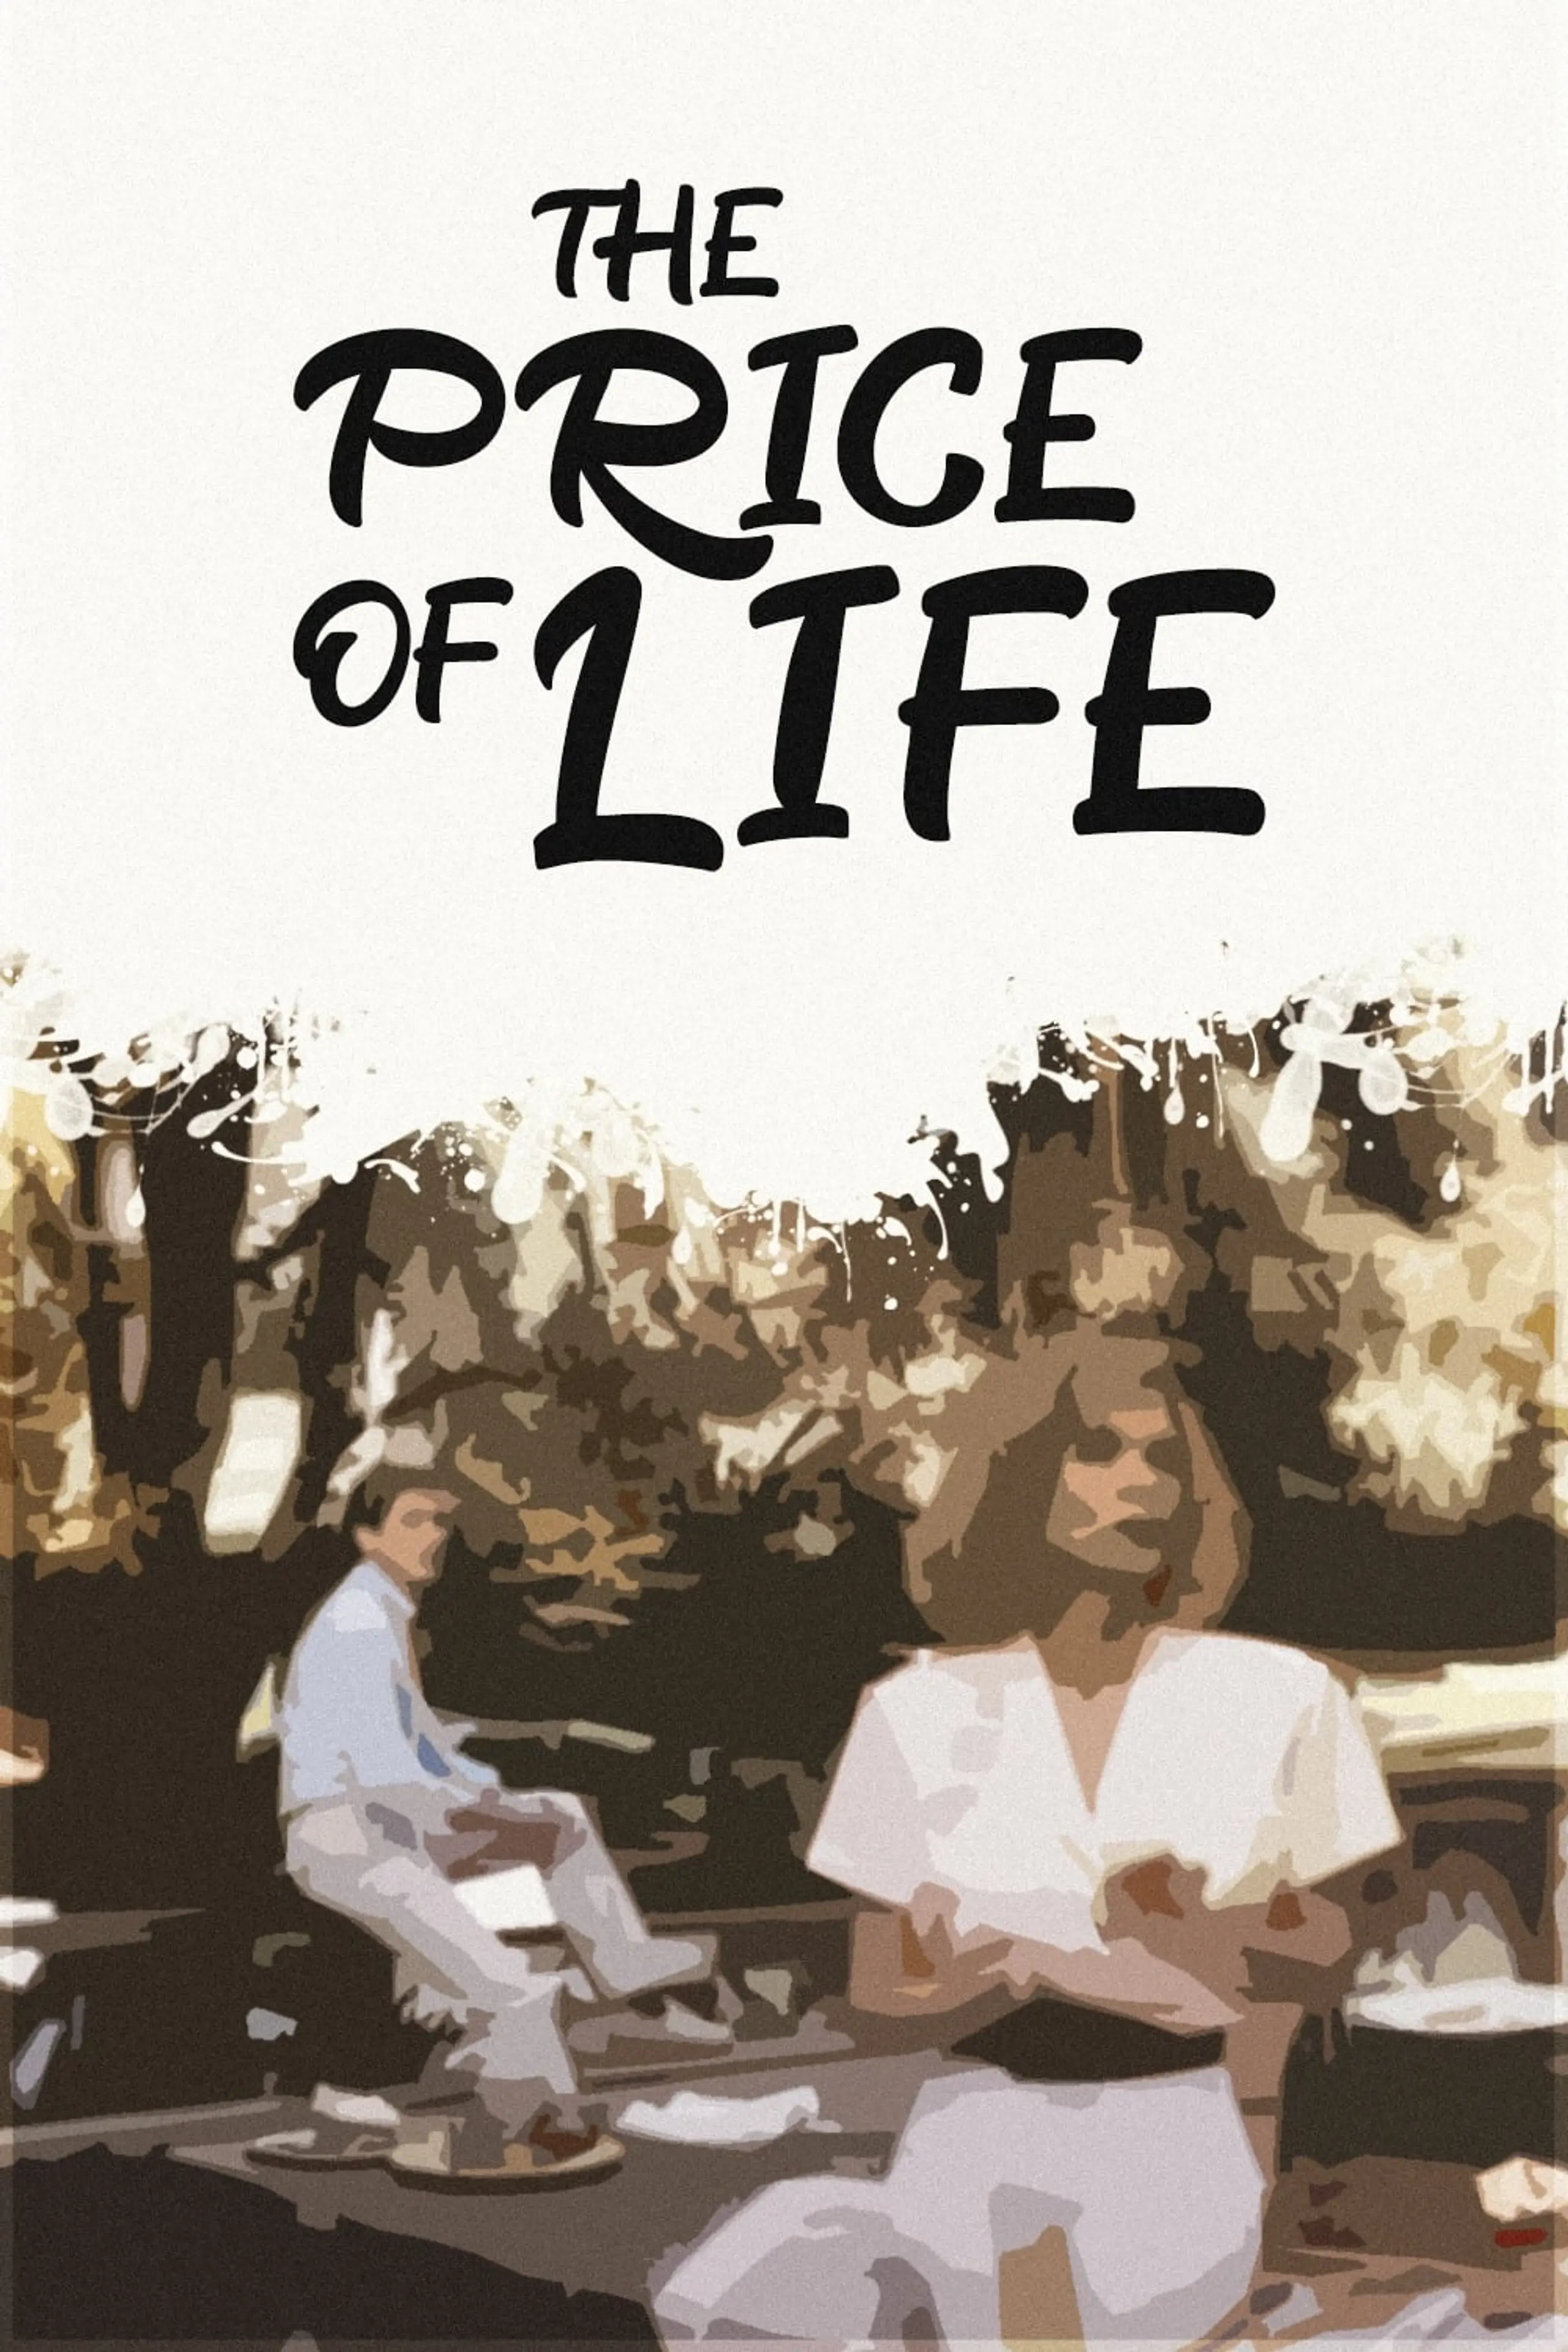 The Price of Life